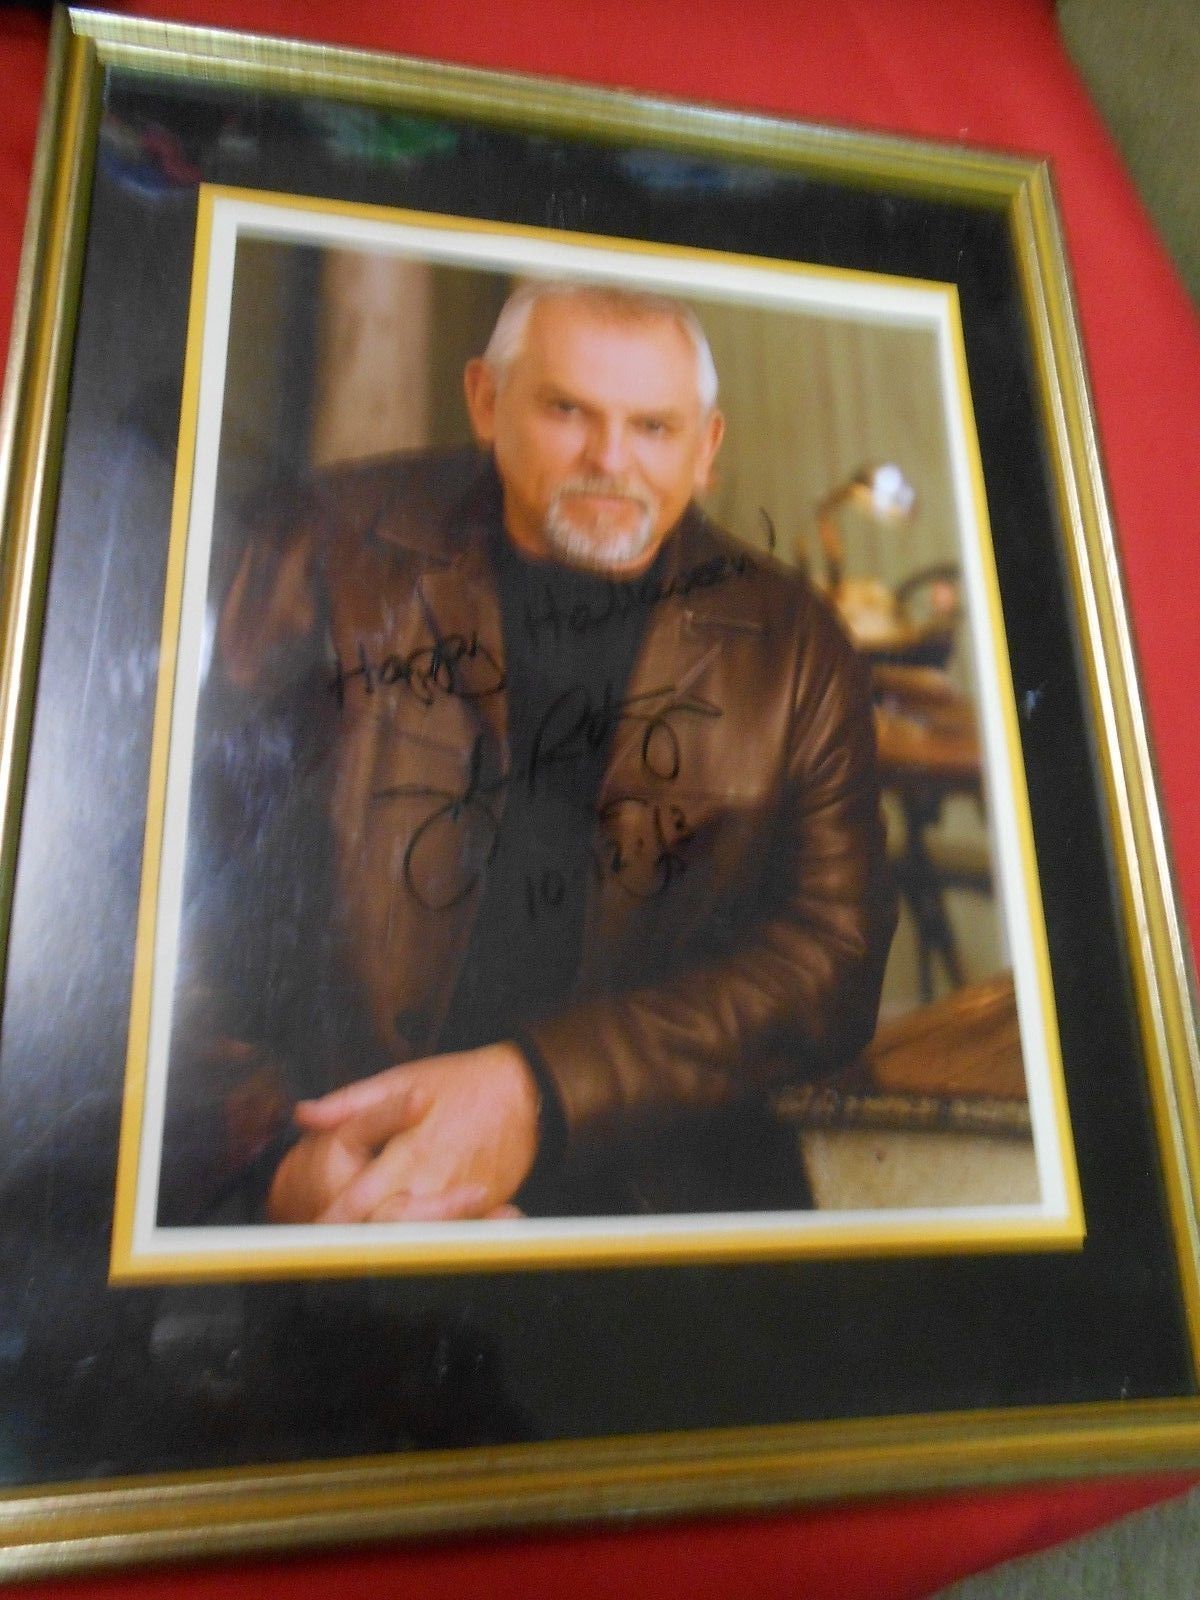 Primary image for Great Collectible JOHN RATZENBERGER Autograph "Happy Halloween".....SALE